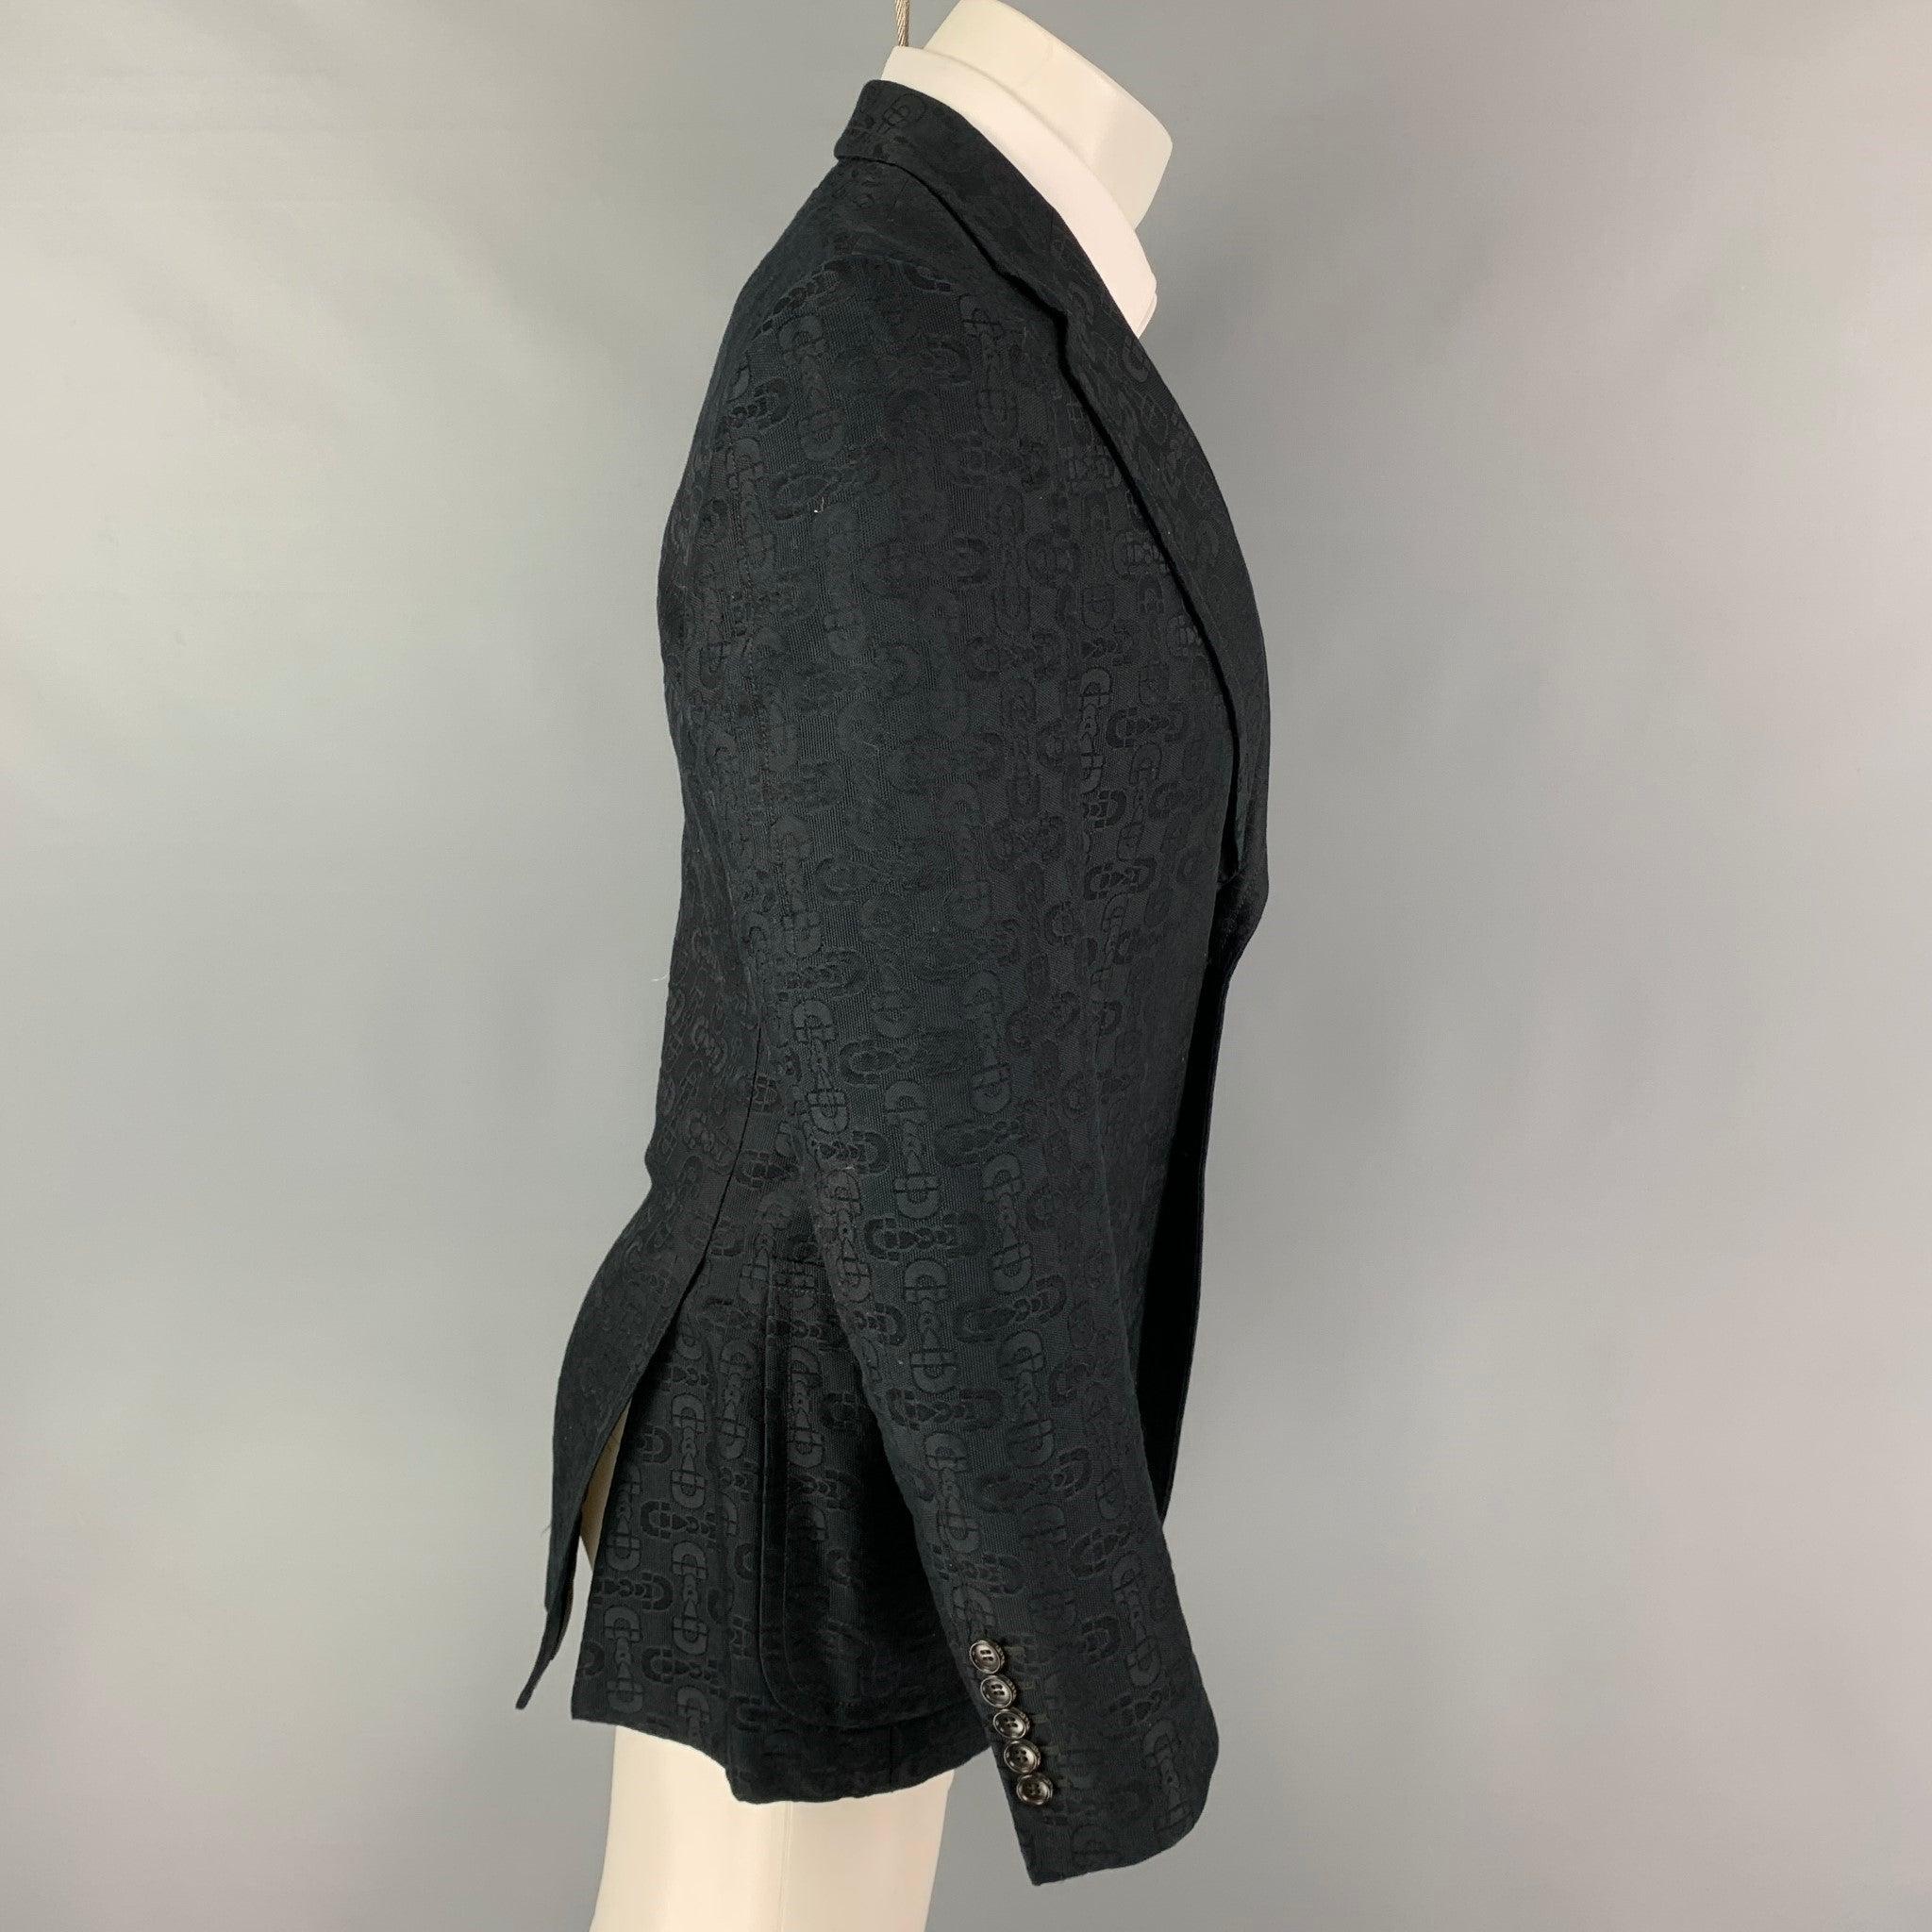 GUCCI by TOM FORD Size 36 Black Jacquard Cotton Silk Notch Lapel Sport Coat In Good Condition For Sale In San Francisco, CA